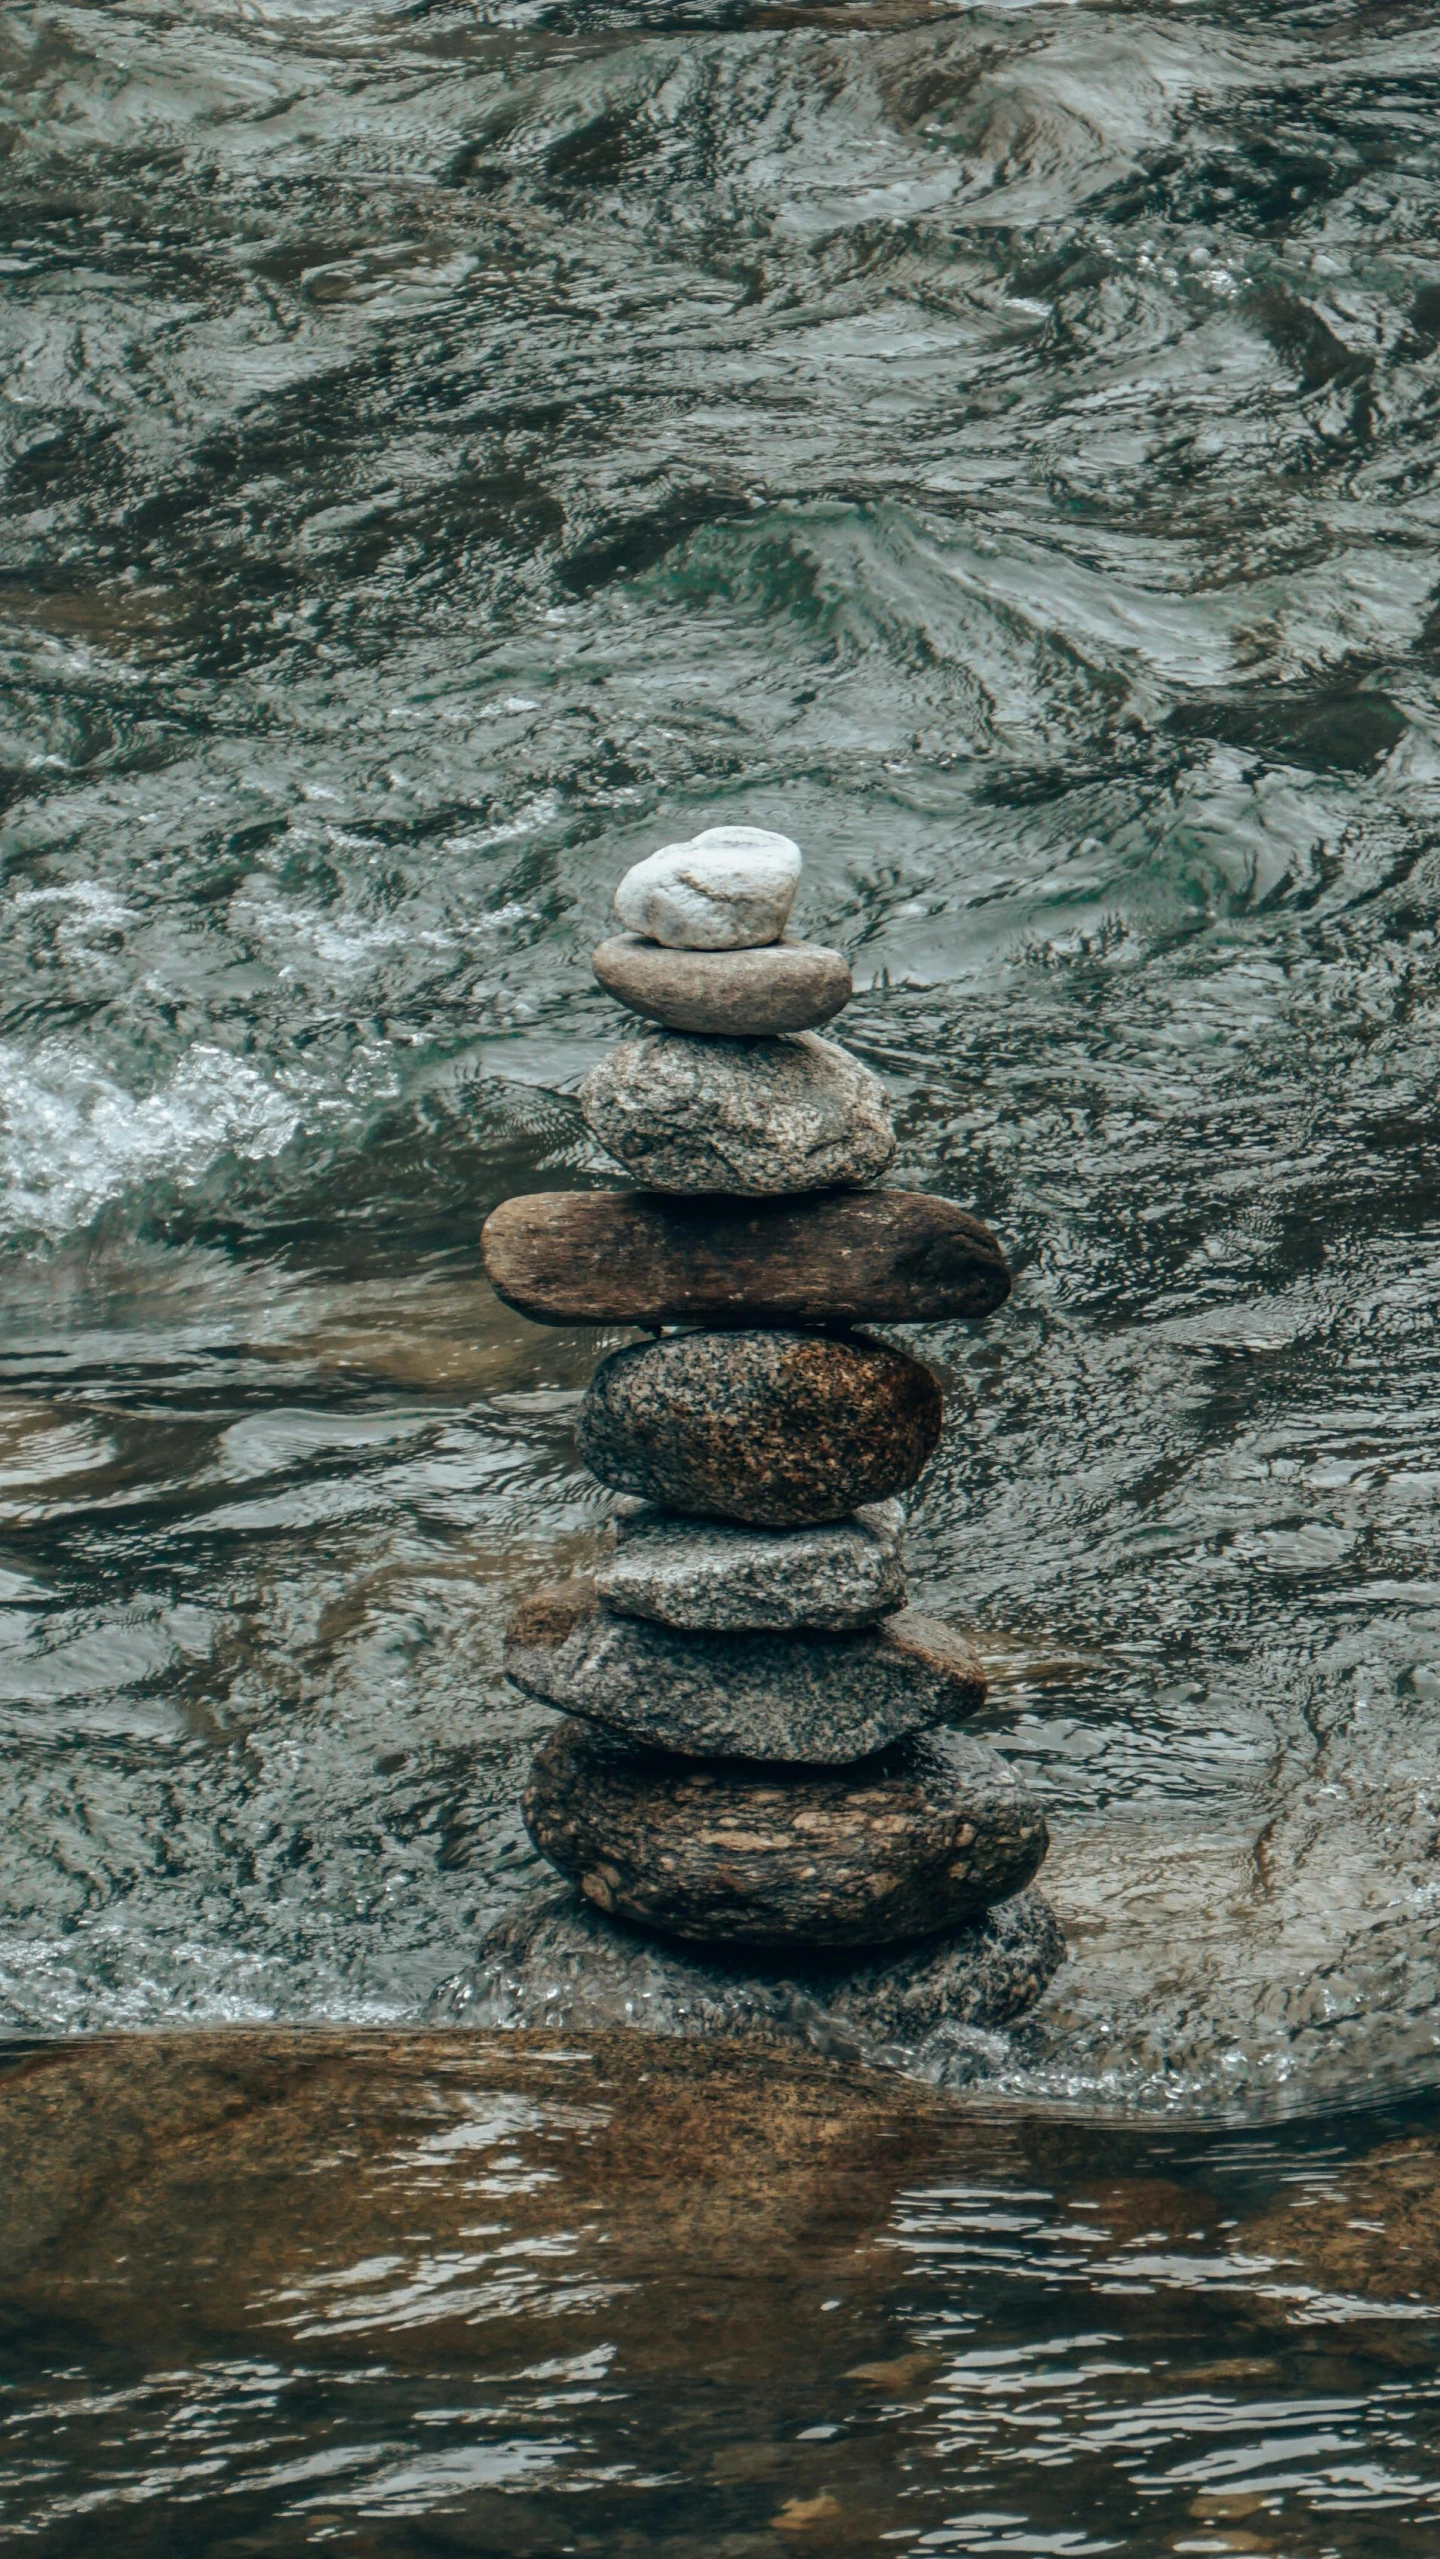 stacked rocks on the ground in a body of water